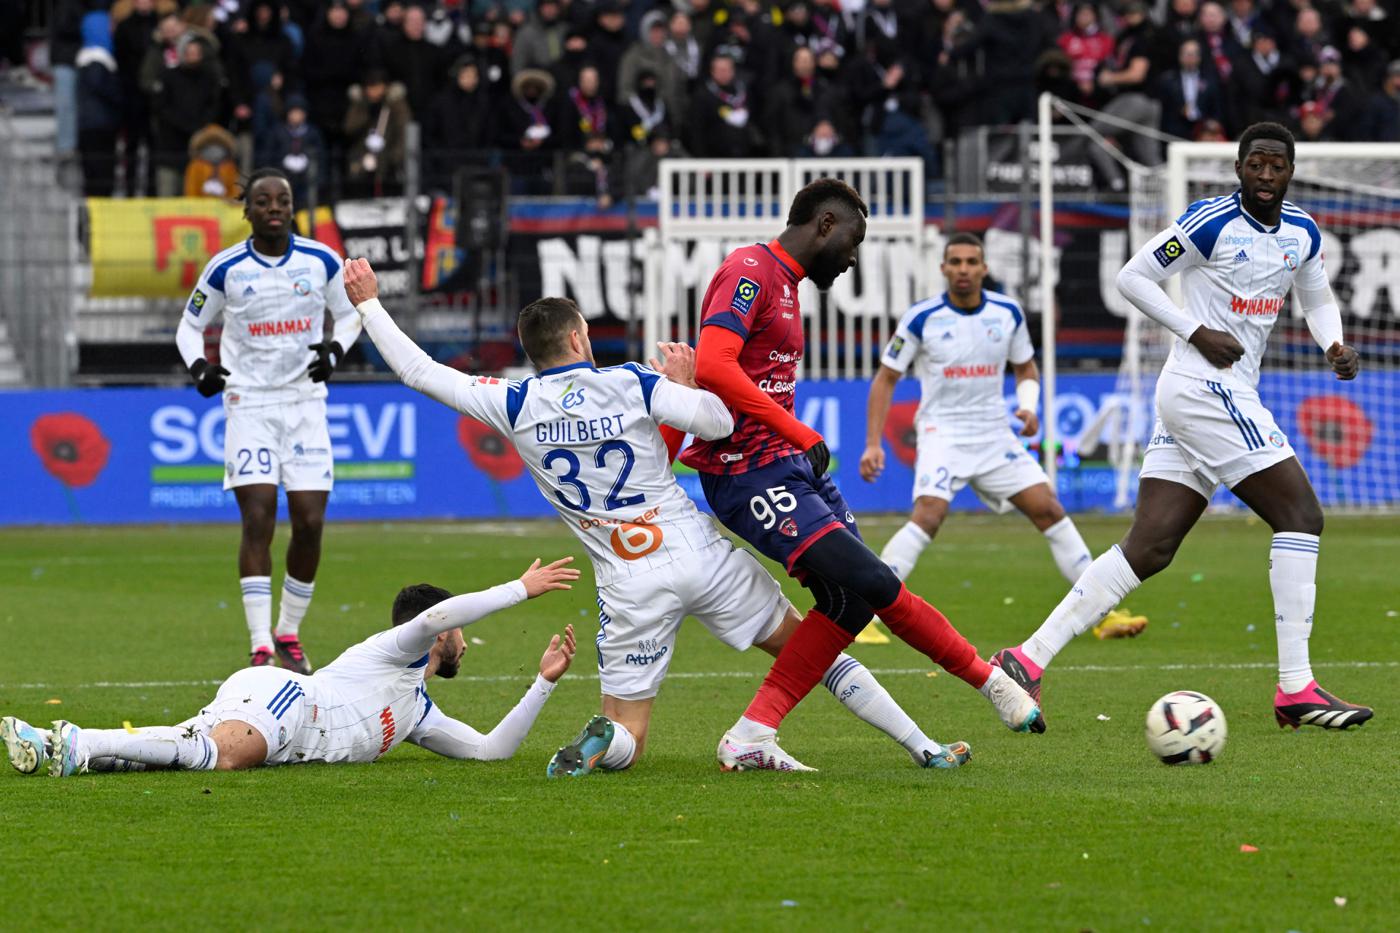 Clermont - Strasbourg - 1:1. French Premier League, 25th round. Match review, statistics.